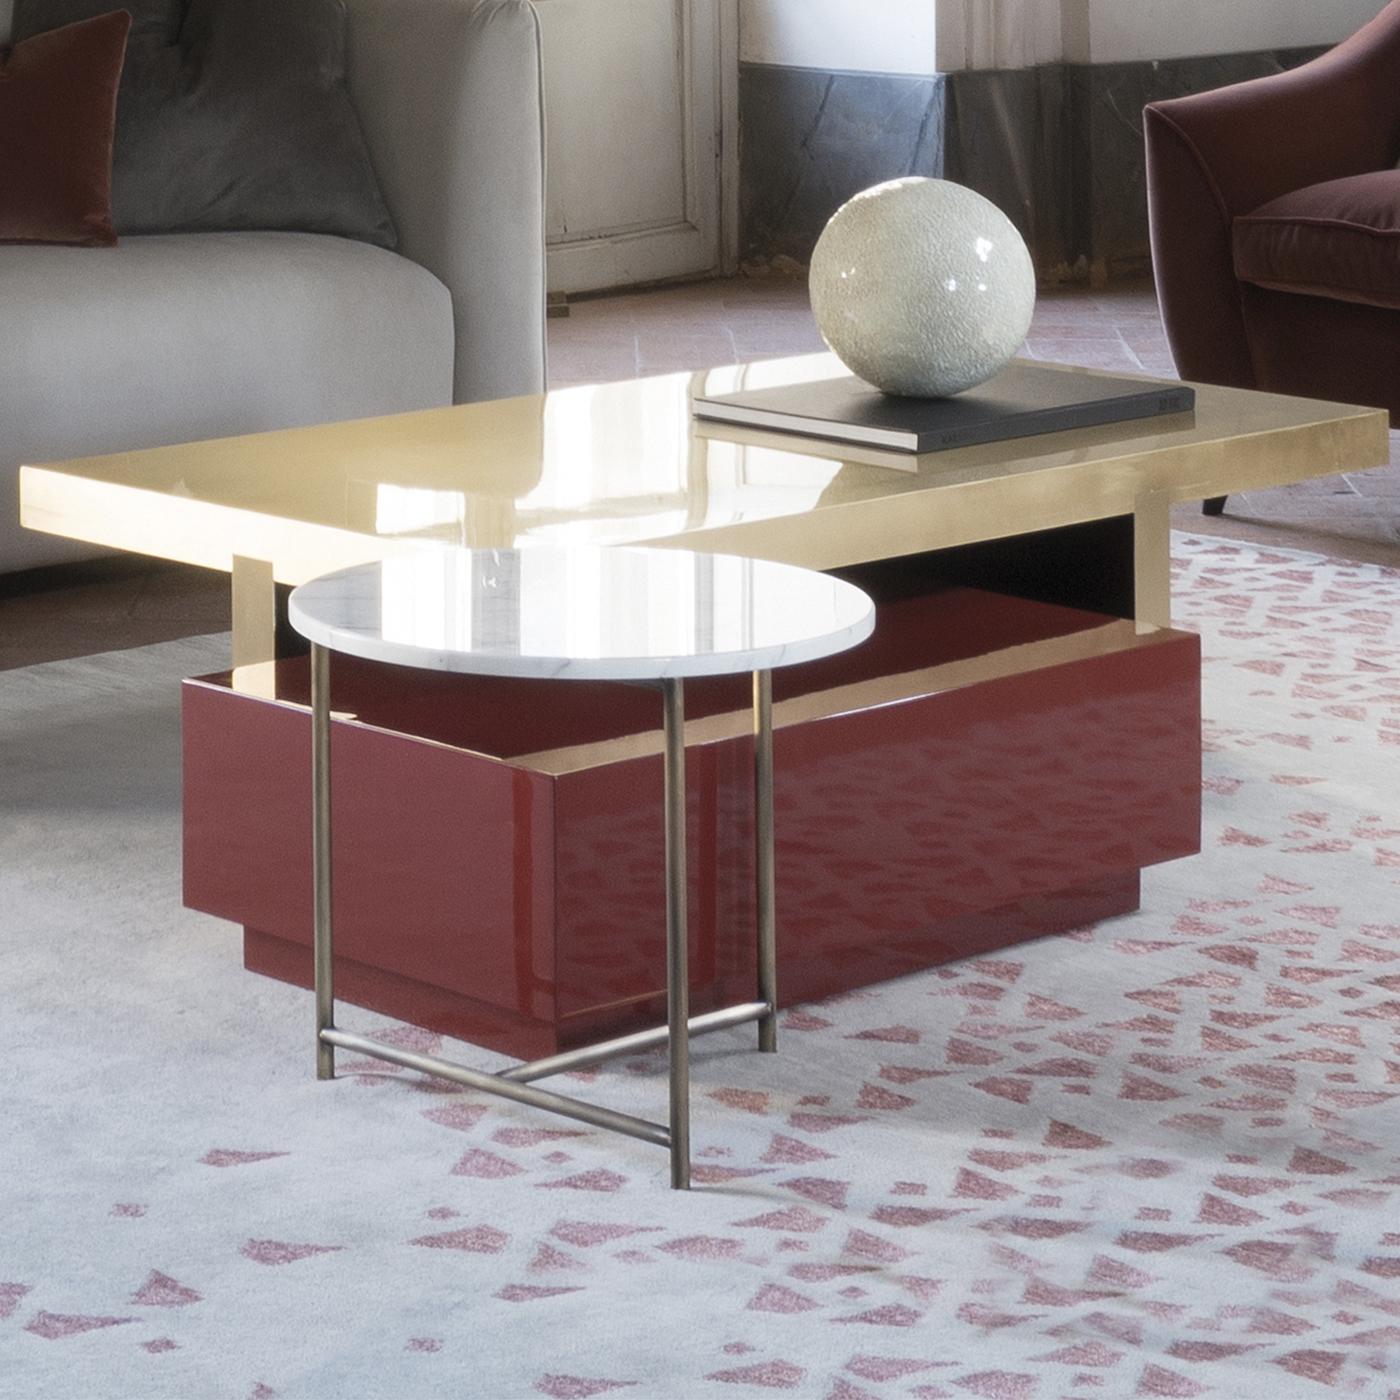 Daring design and color choices make this lavish table a one-of-a-kind addition to any modern-style decor. Inspired by modernist art, the solid silhouette is cleverly created by superimposing two concentric rectangles, the larger one acting as the